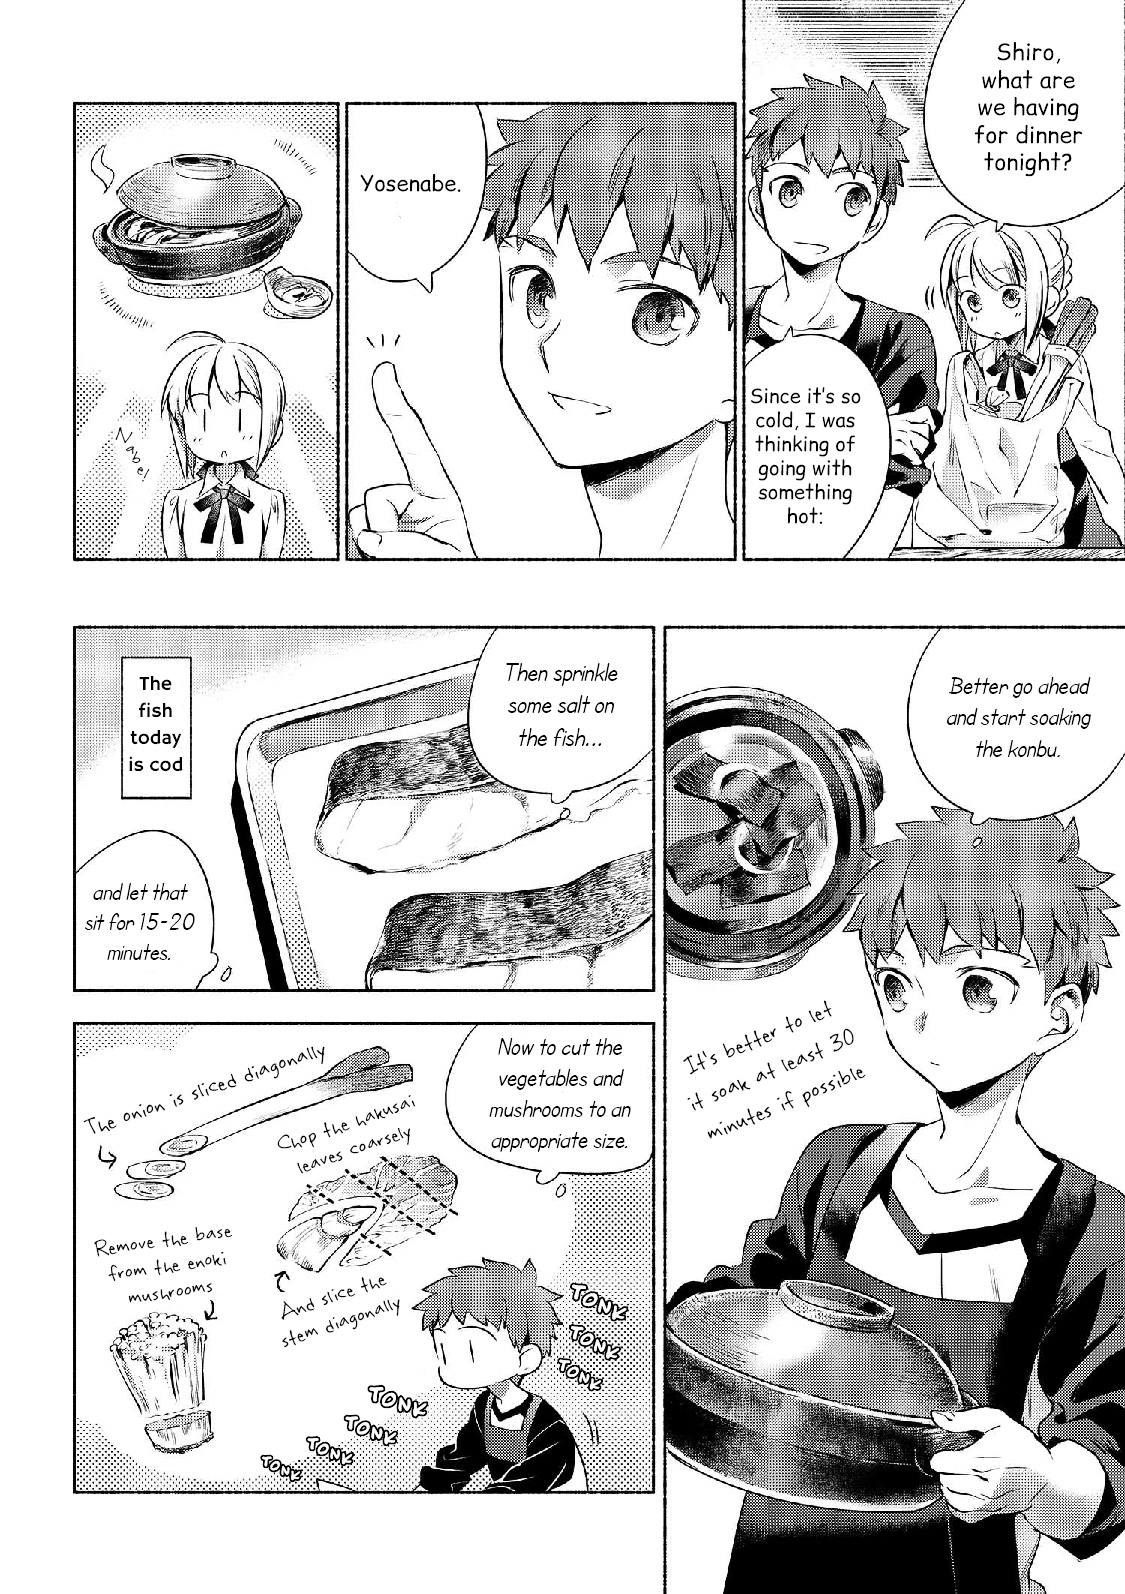 What's Cooking at the Emiya House Today? vol.1 ch.1